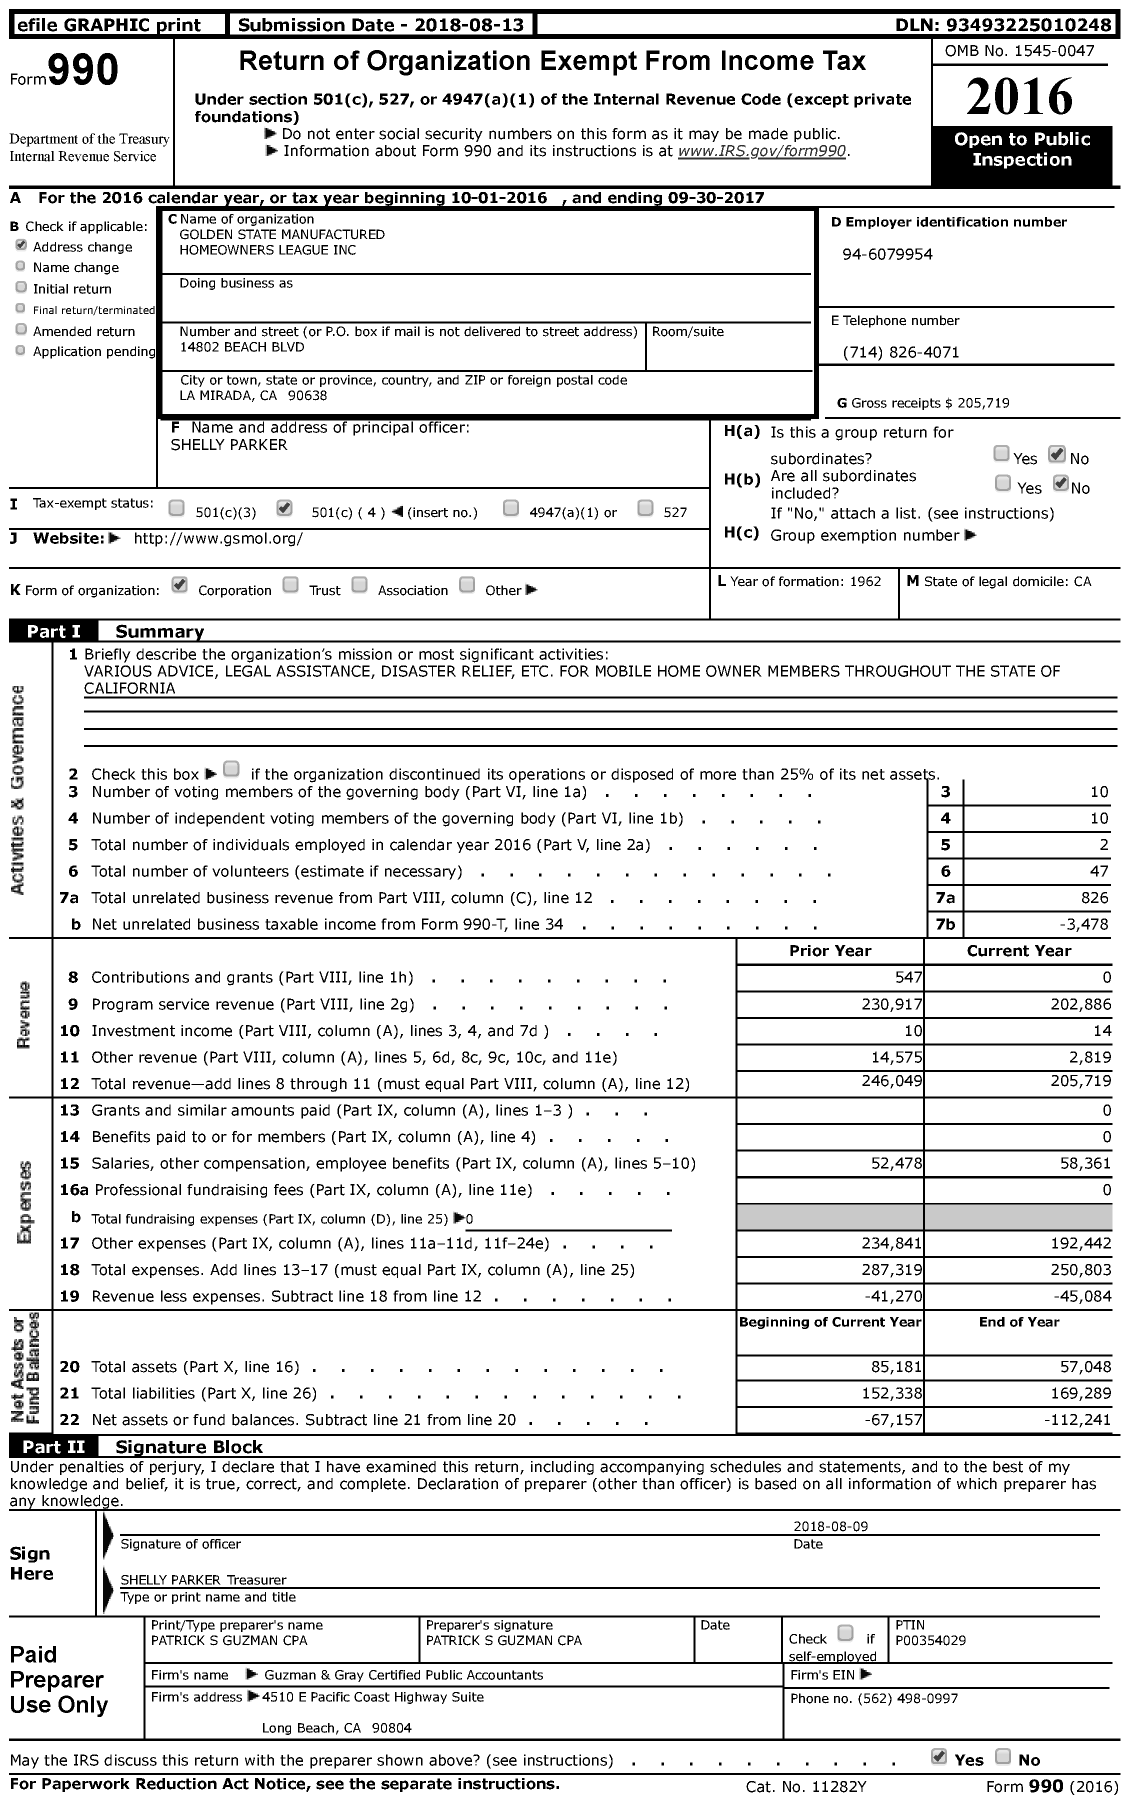 Image of first page of 2016 Form 990 for Golden State Manufactured Homeowners League